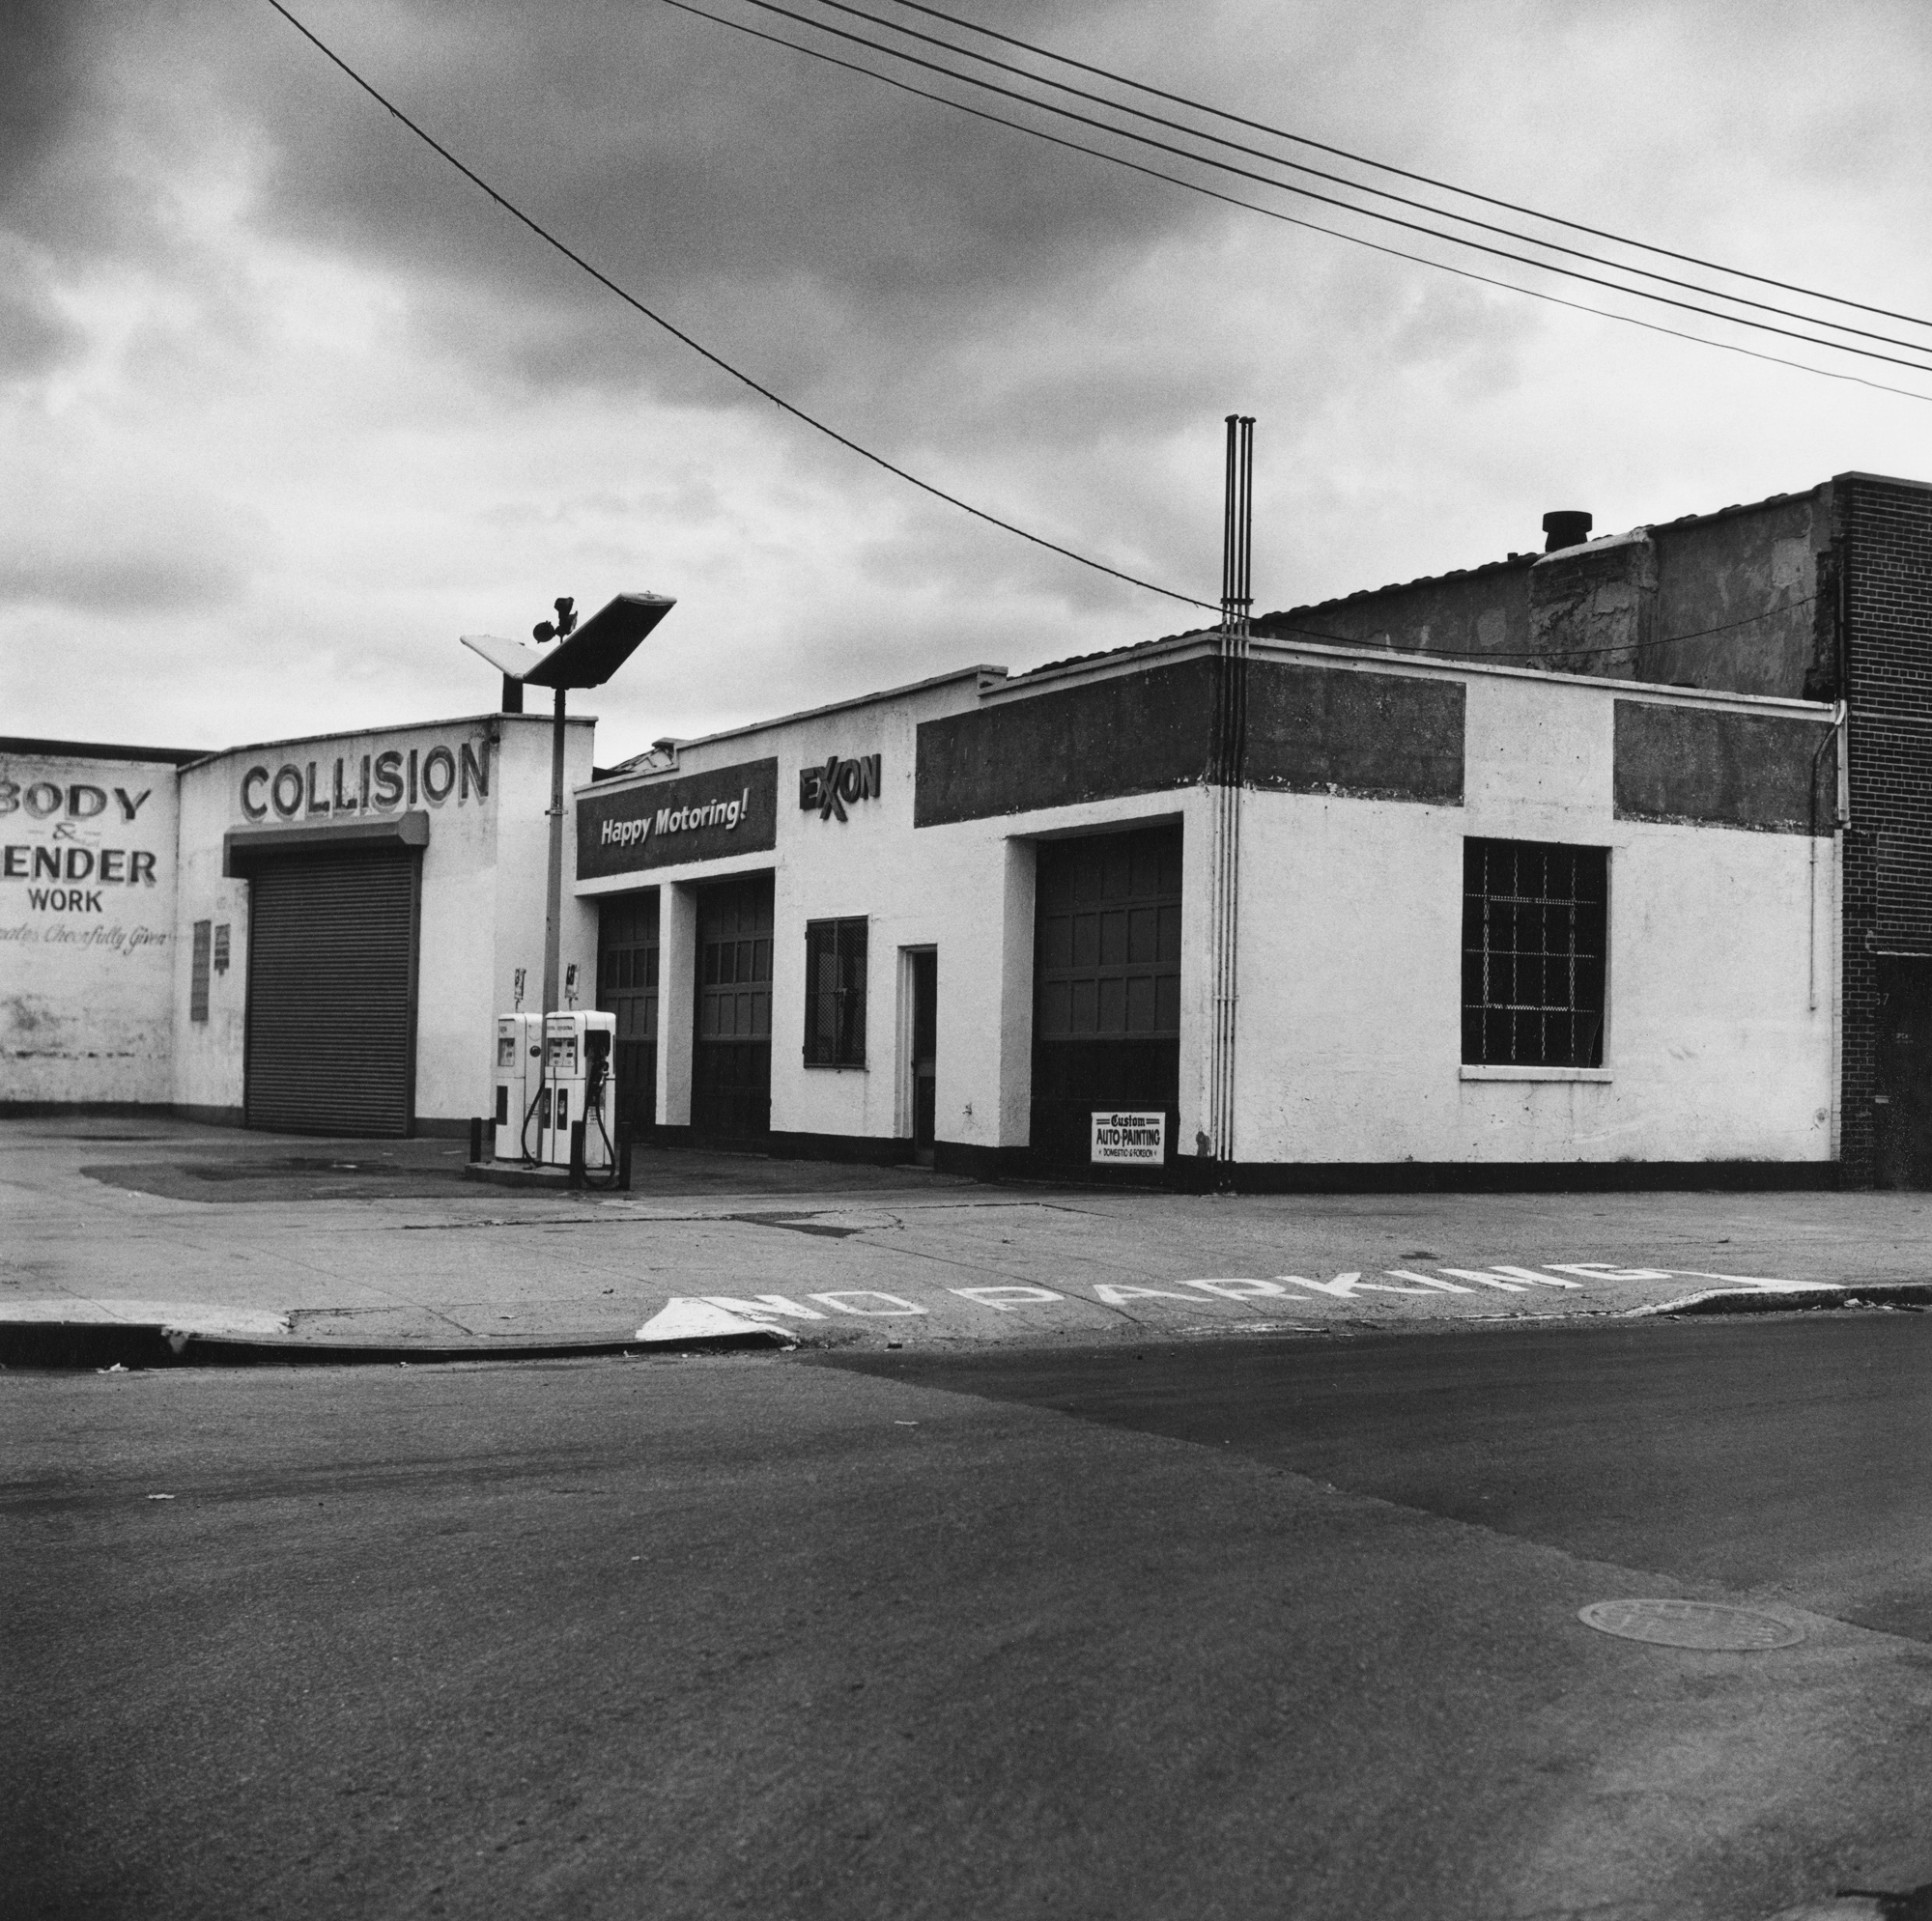 Black and white photograph of the exterior of a gas station during early morning hours